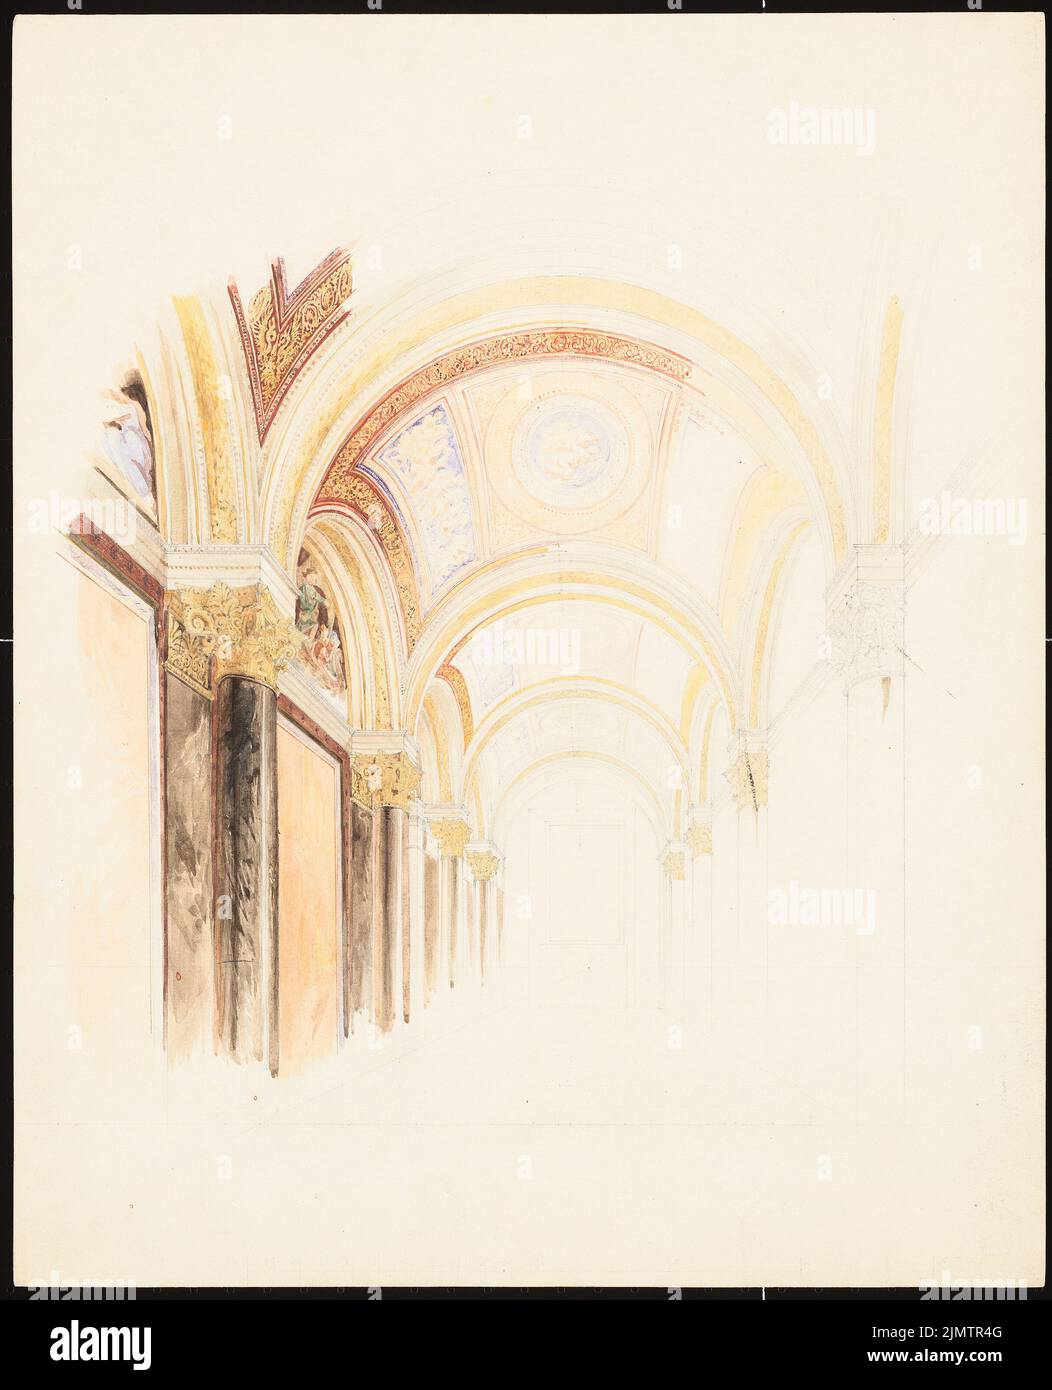 Strack Johann Heinrich (1805-1880), National Gallery on the Museum Island in Berlin (1877): Perspective interior view of the large cross gallery in 1st floor. Pencil watercolored on paper, 49.5 x 40.1 cm (including scan edges) Strack Johann Heinrich  (1805-1880): Nationalgalerie auf der Museumsinsel, Berlin Stock Photo